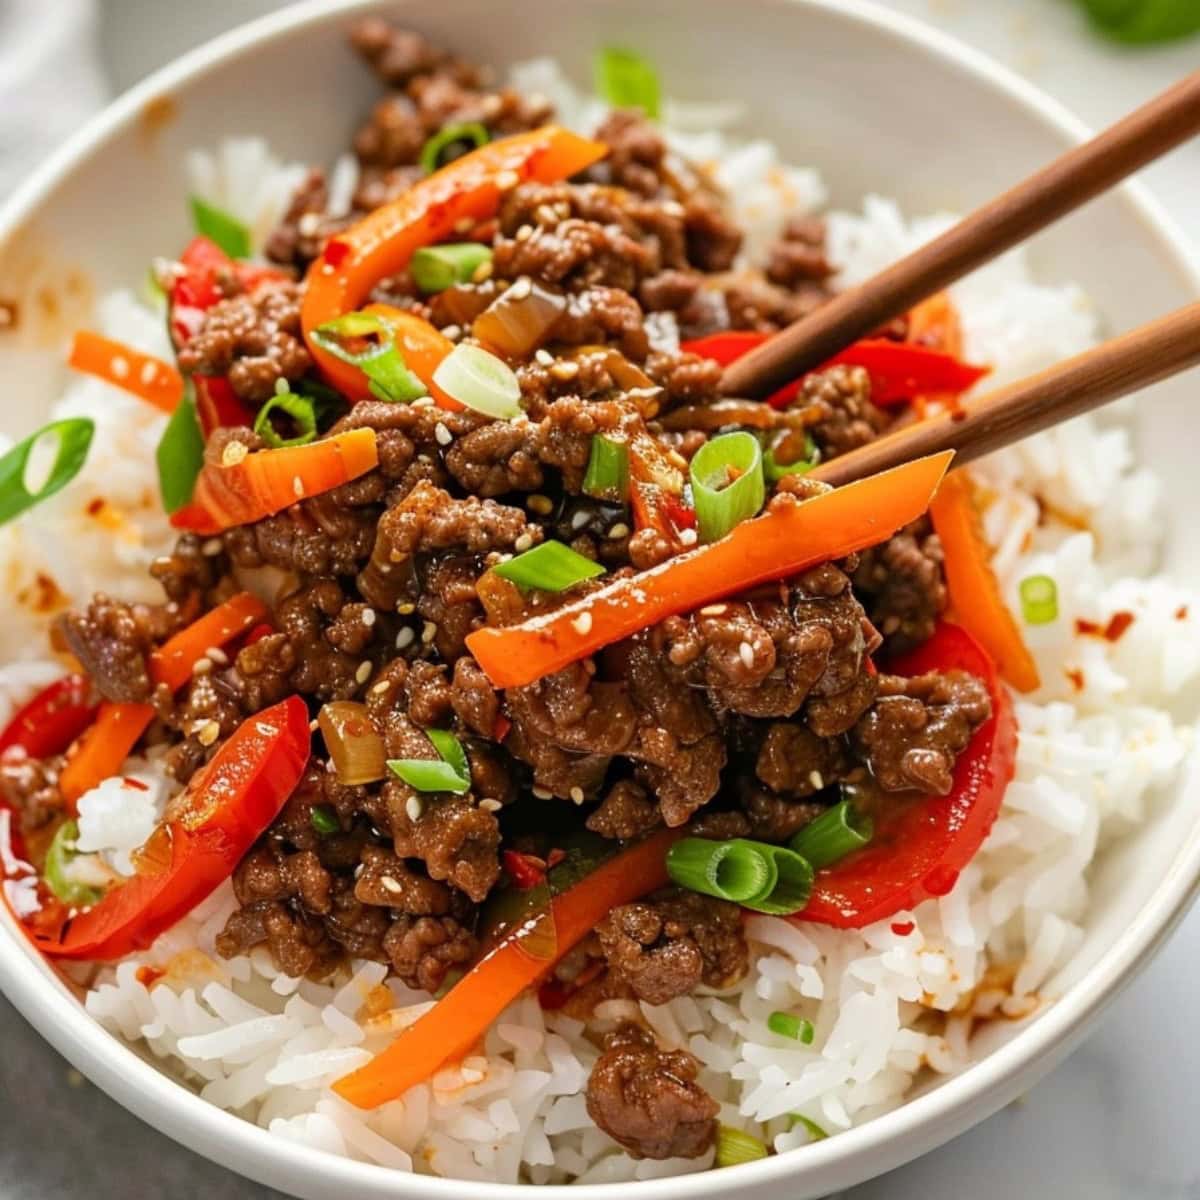 Chopsticks mixing beef with carrots, bell pepper and green onions topped on a white rice.